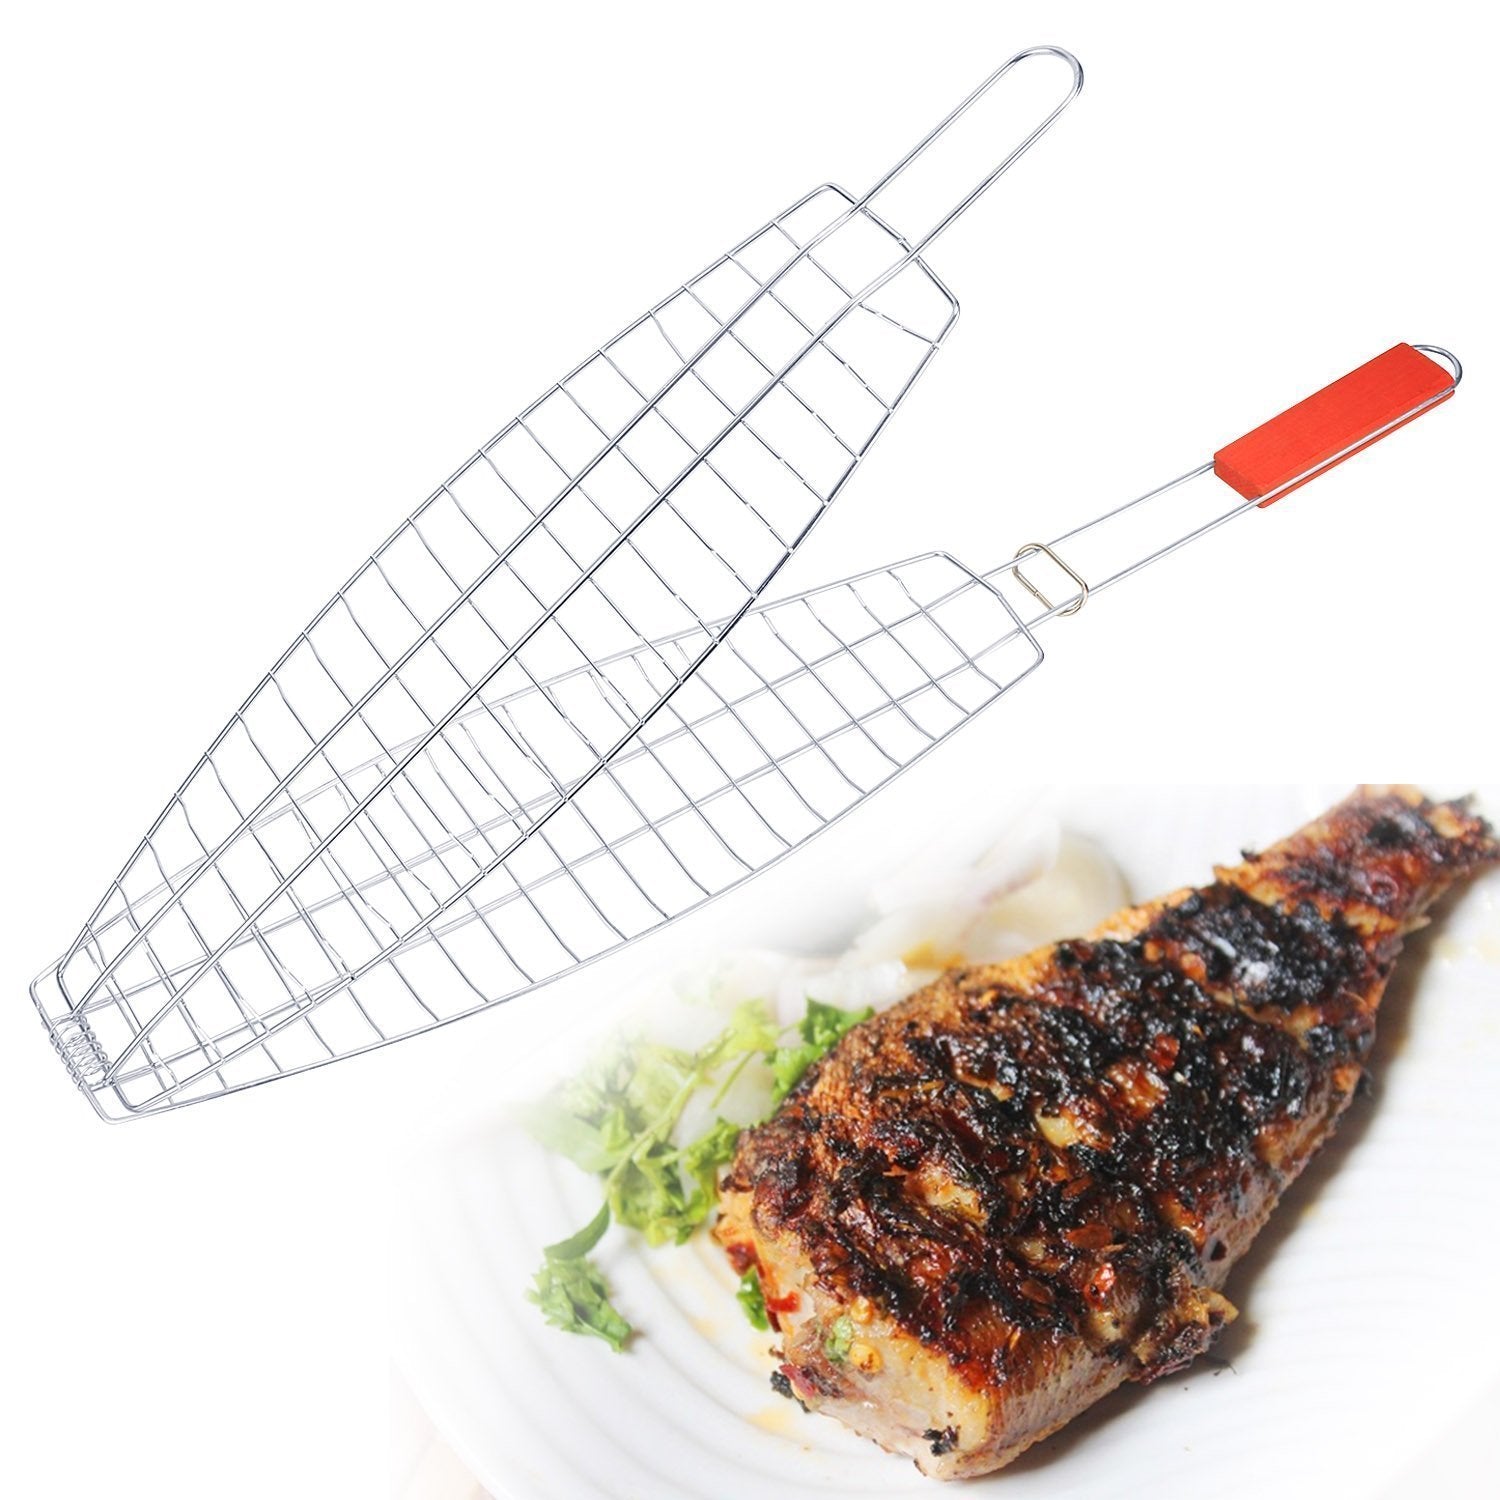 HomeFast BBQ Barbeque Fish Grill (67 cm x 15 cm)